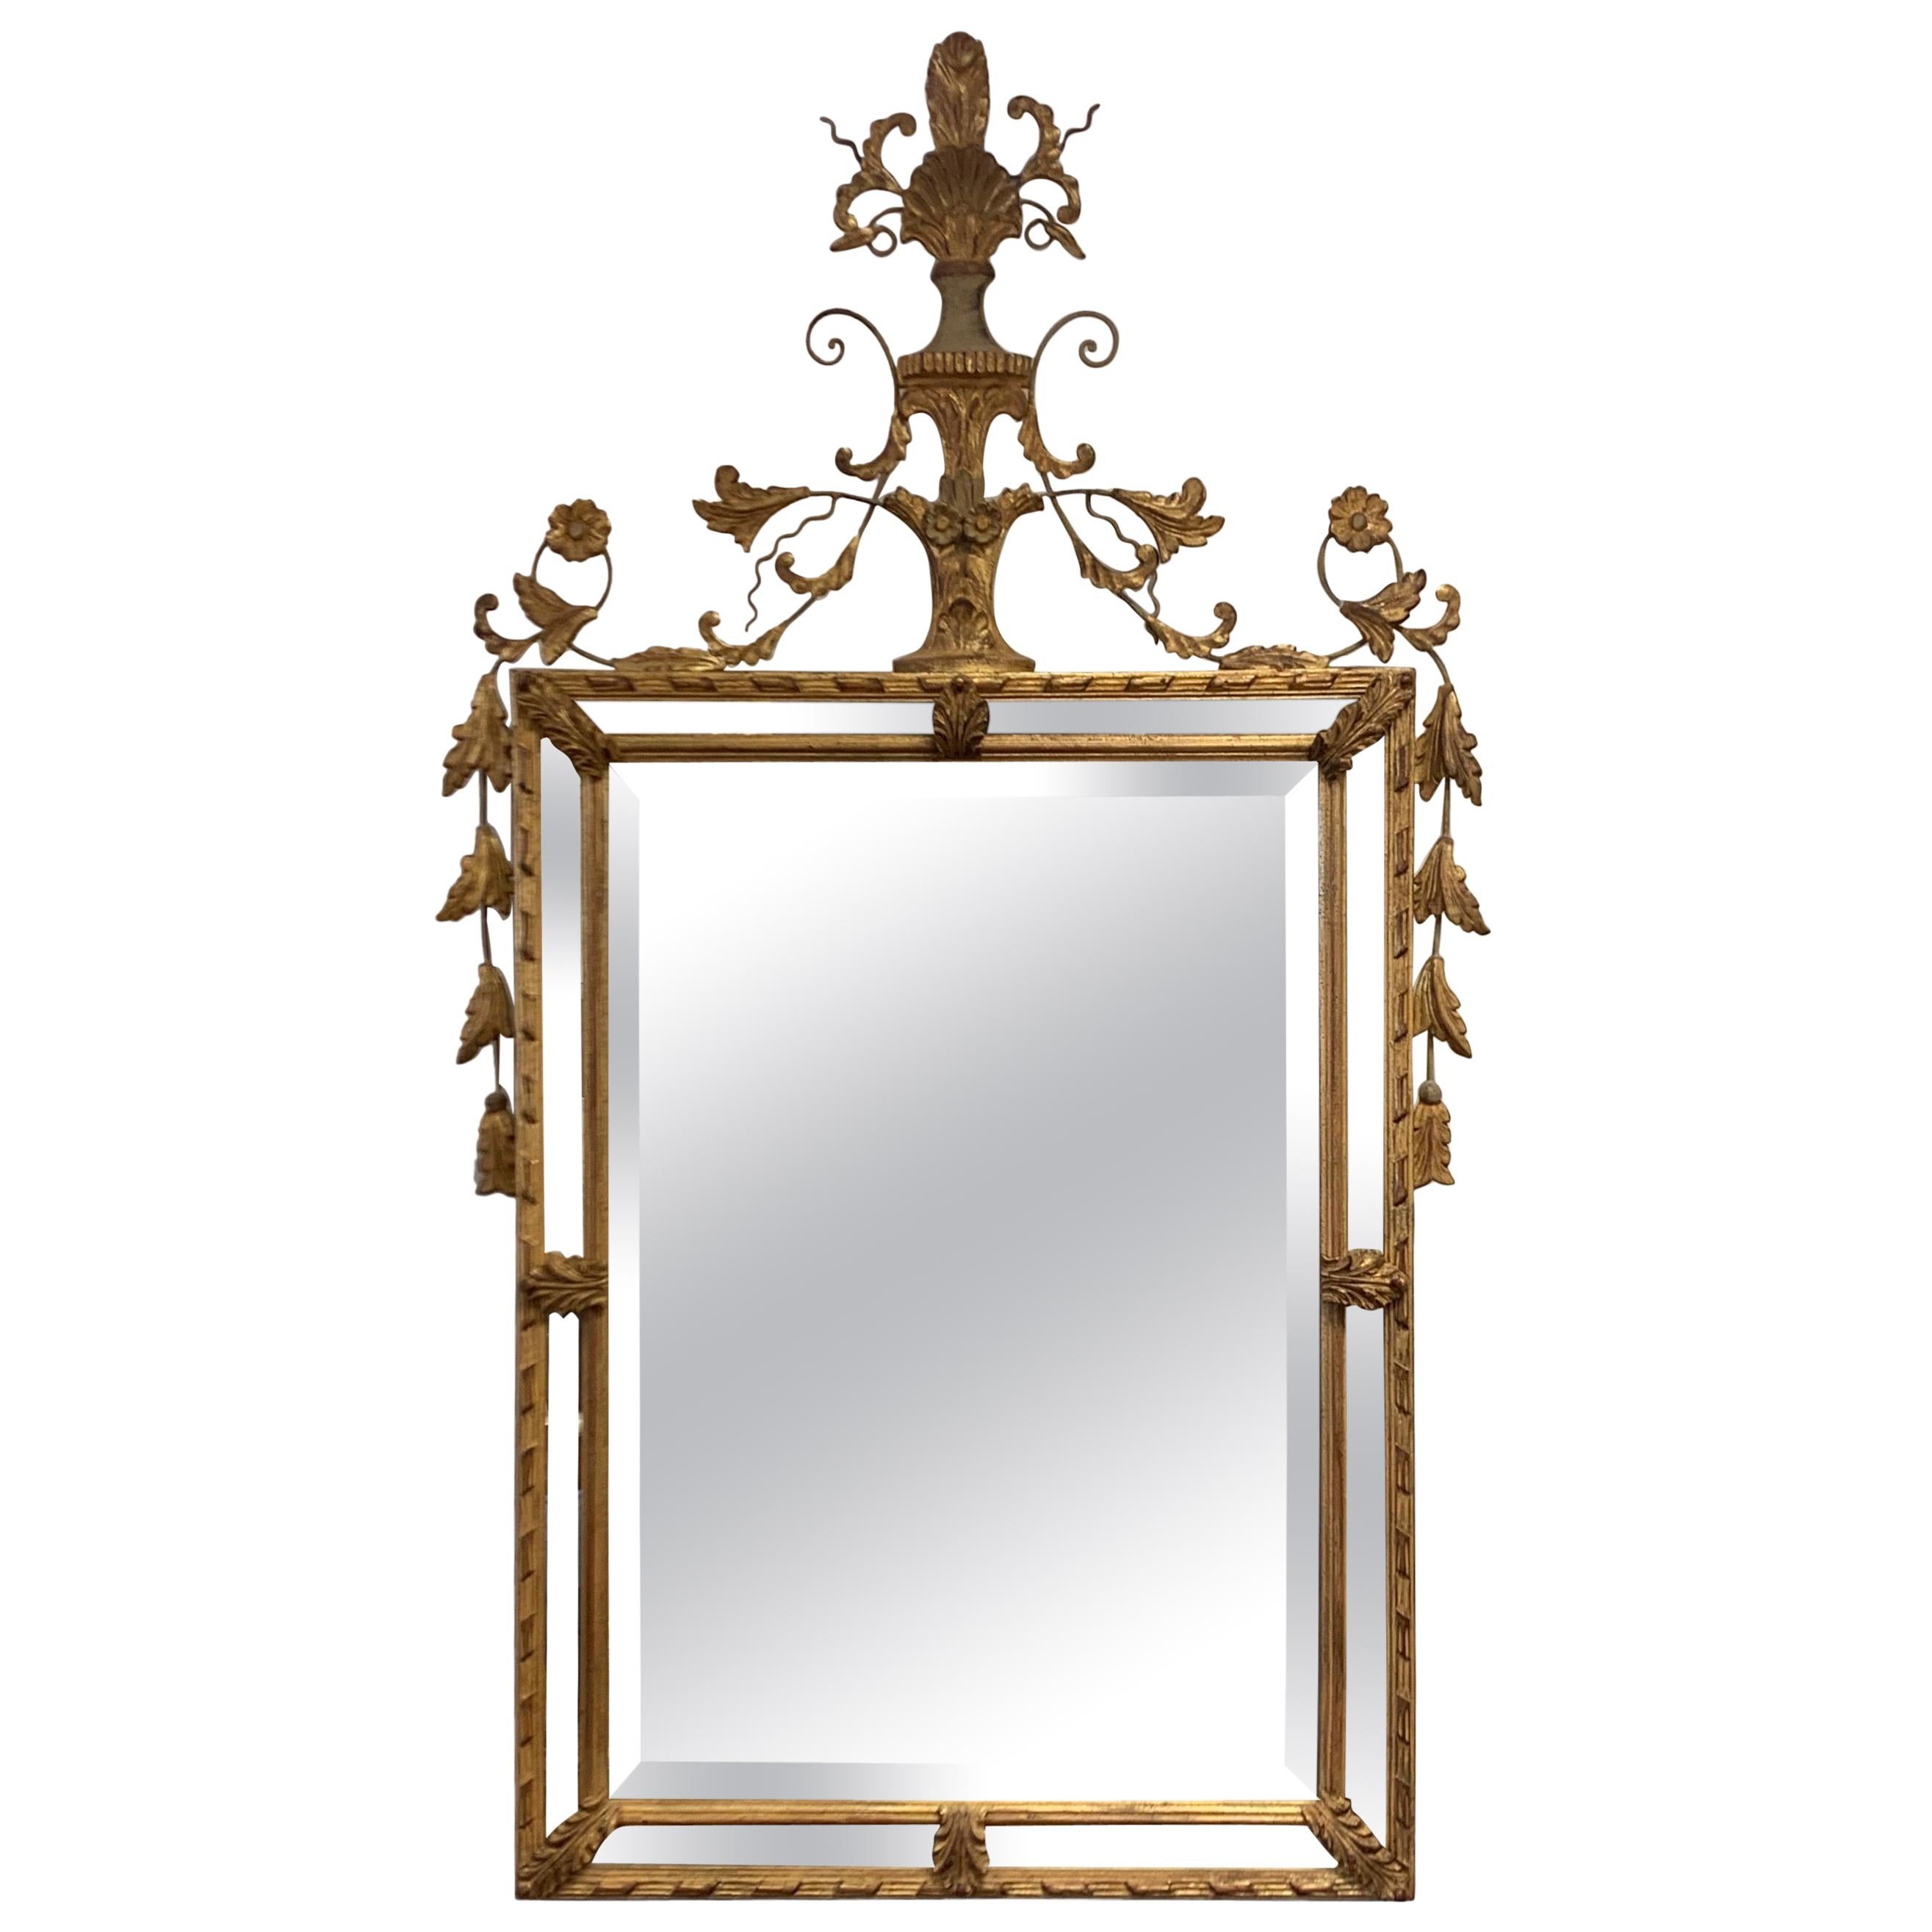 Carved Ornate Large Neoclassical Giltwood Wall Mirror